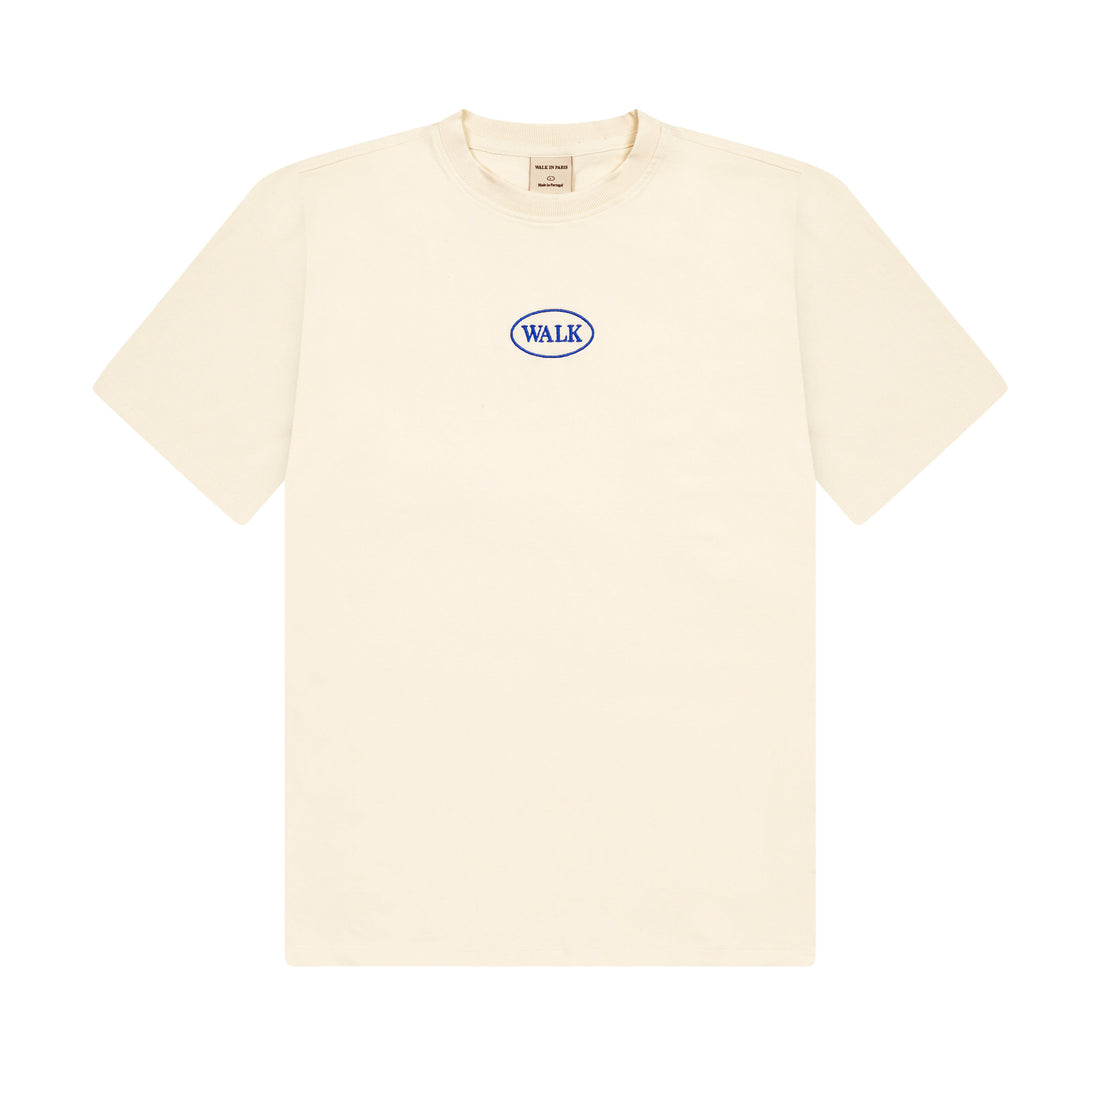 The classic sand t-shirt